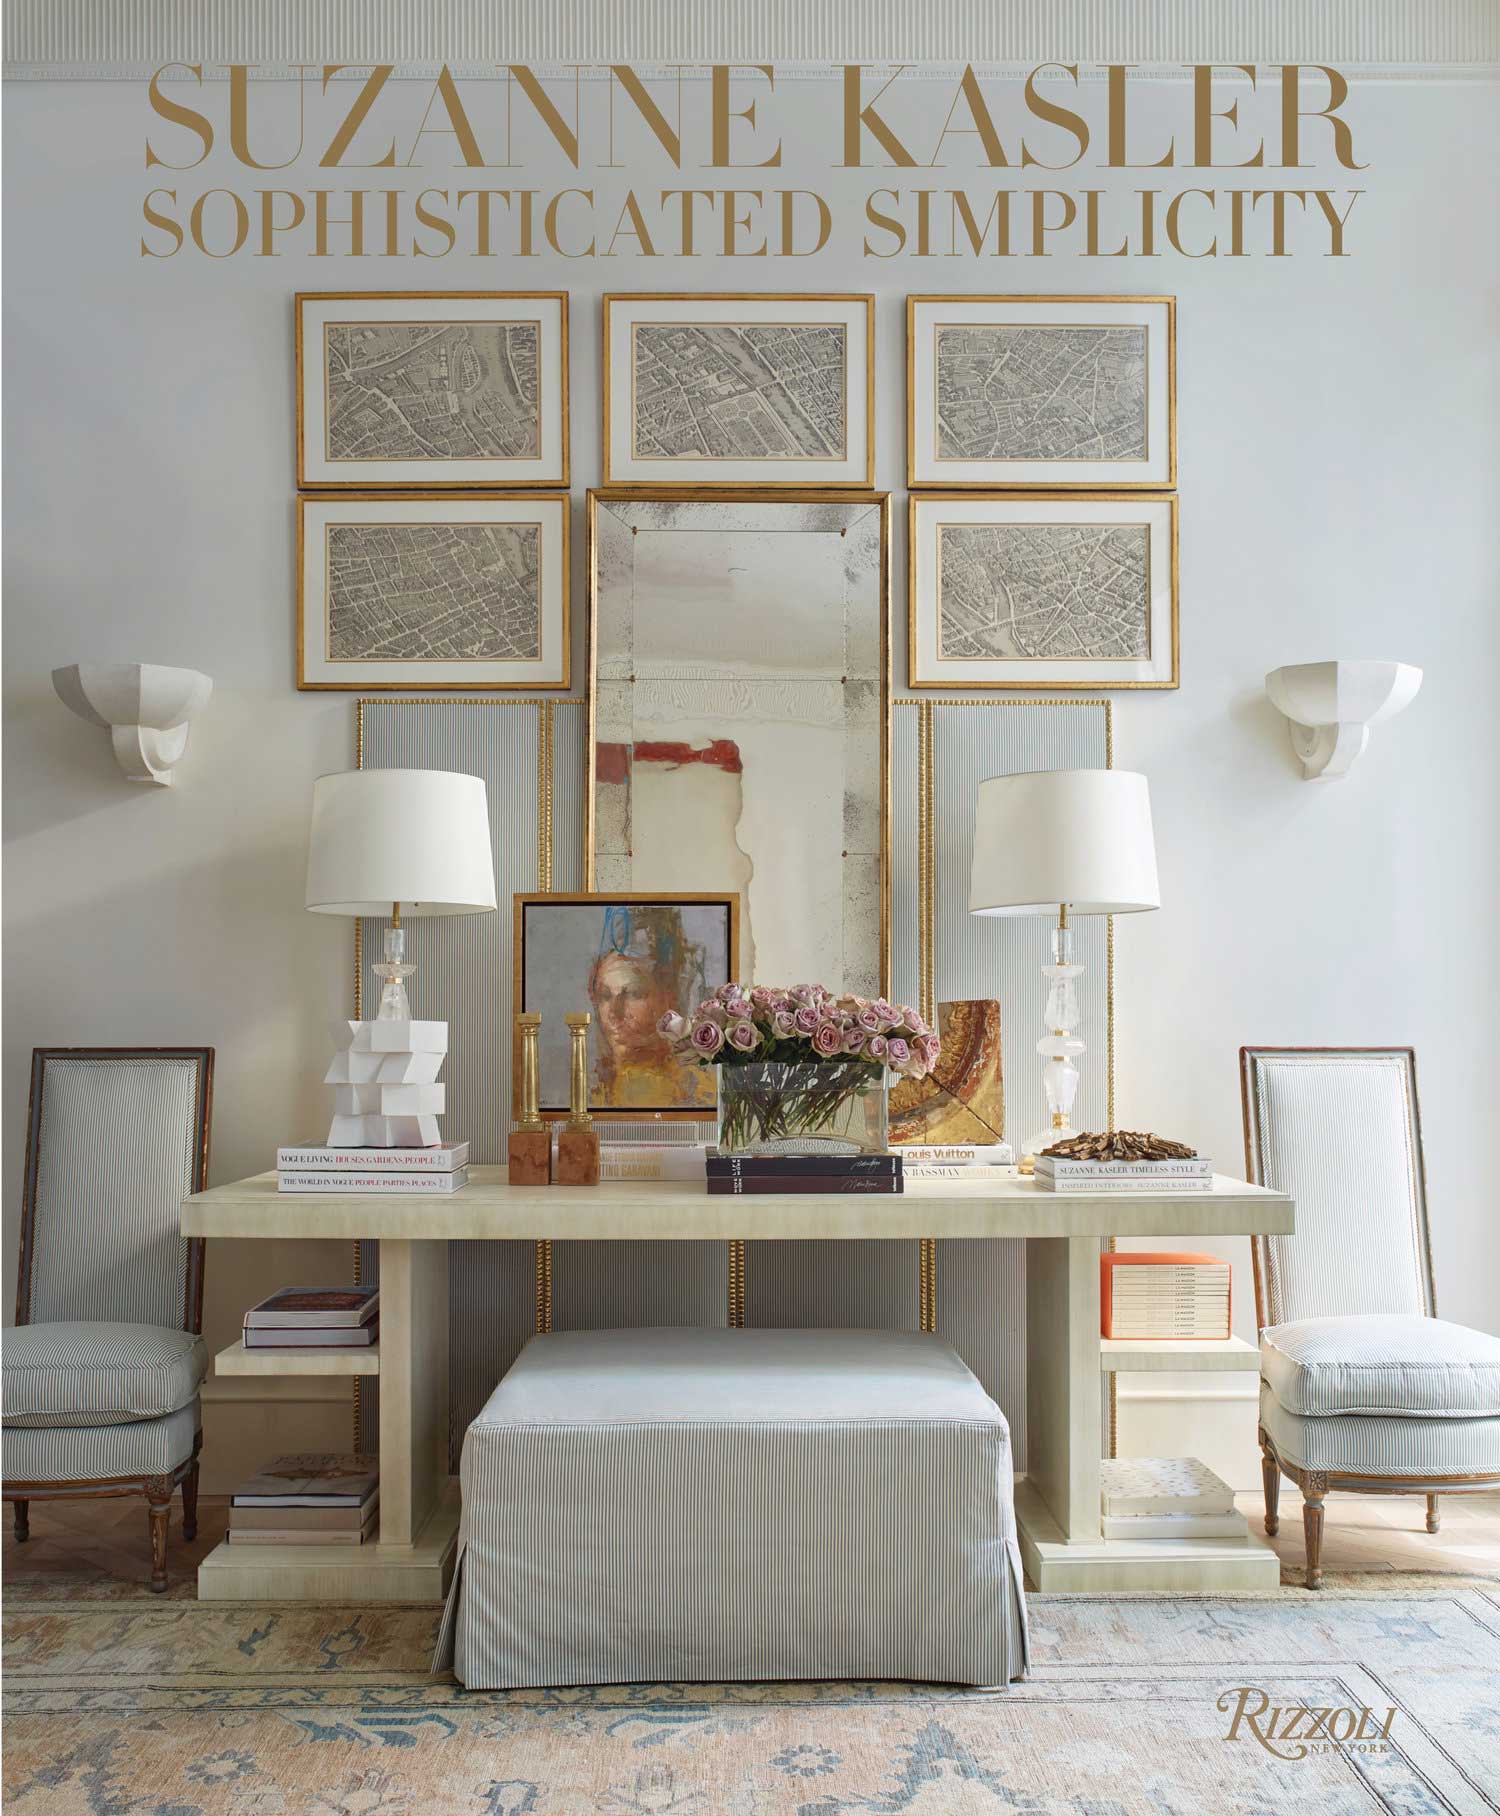 Sophisticated Simplicity book cover